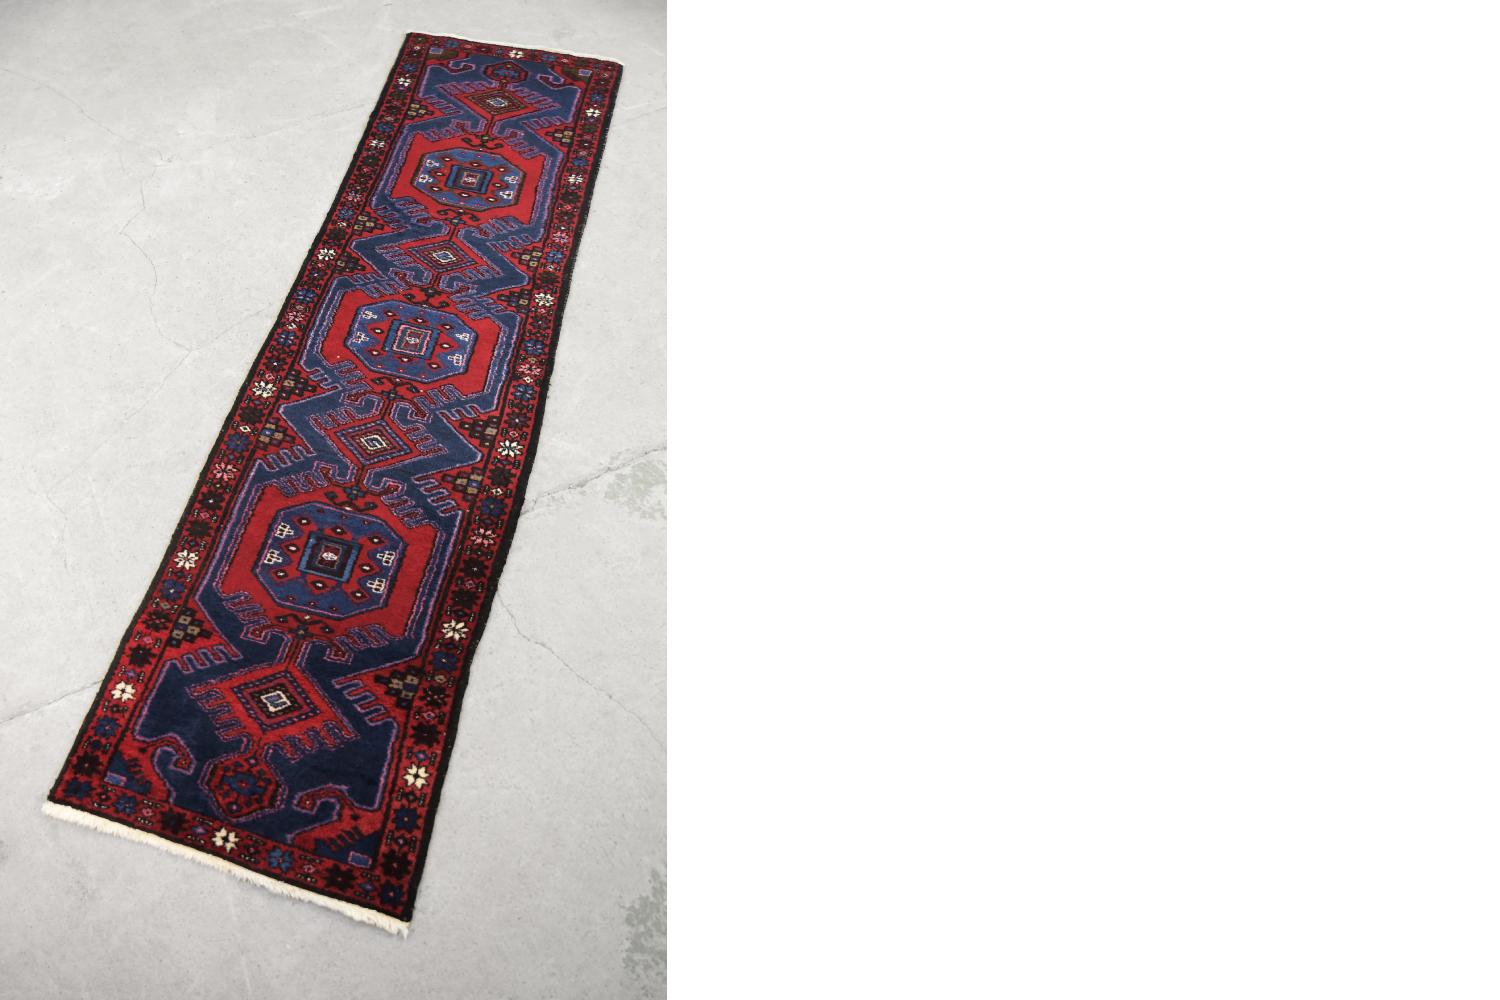 Original Vintage Hand-Woven Oriental Persian Carpet Hamadan Rug from Ikea, 1960s In Good Condition For Sale In Warszawa, Mazowieckie